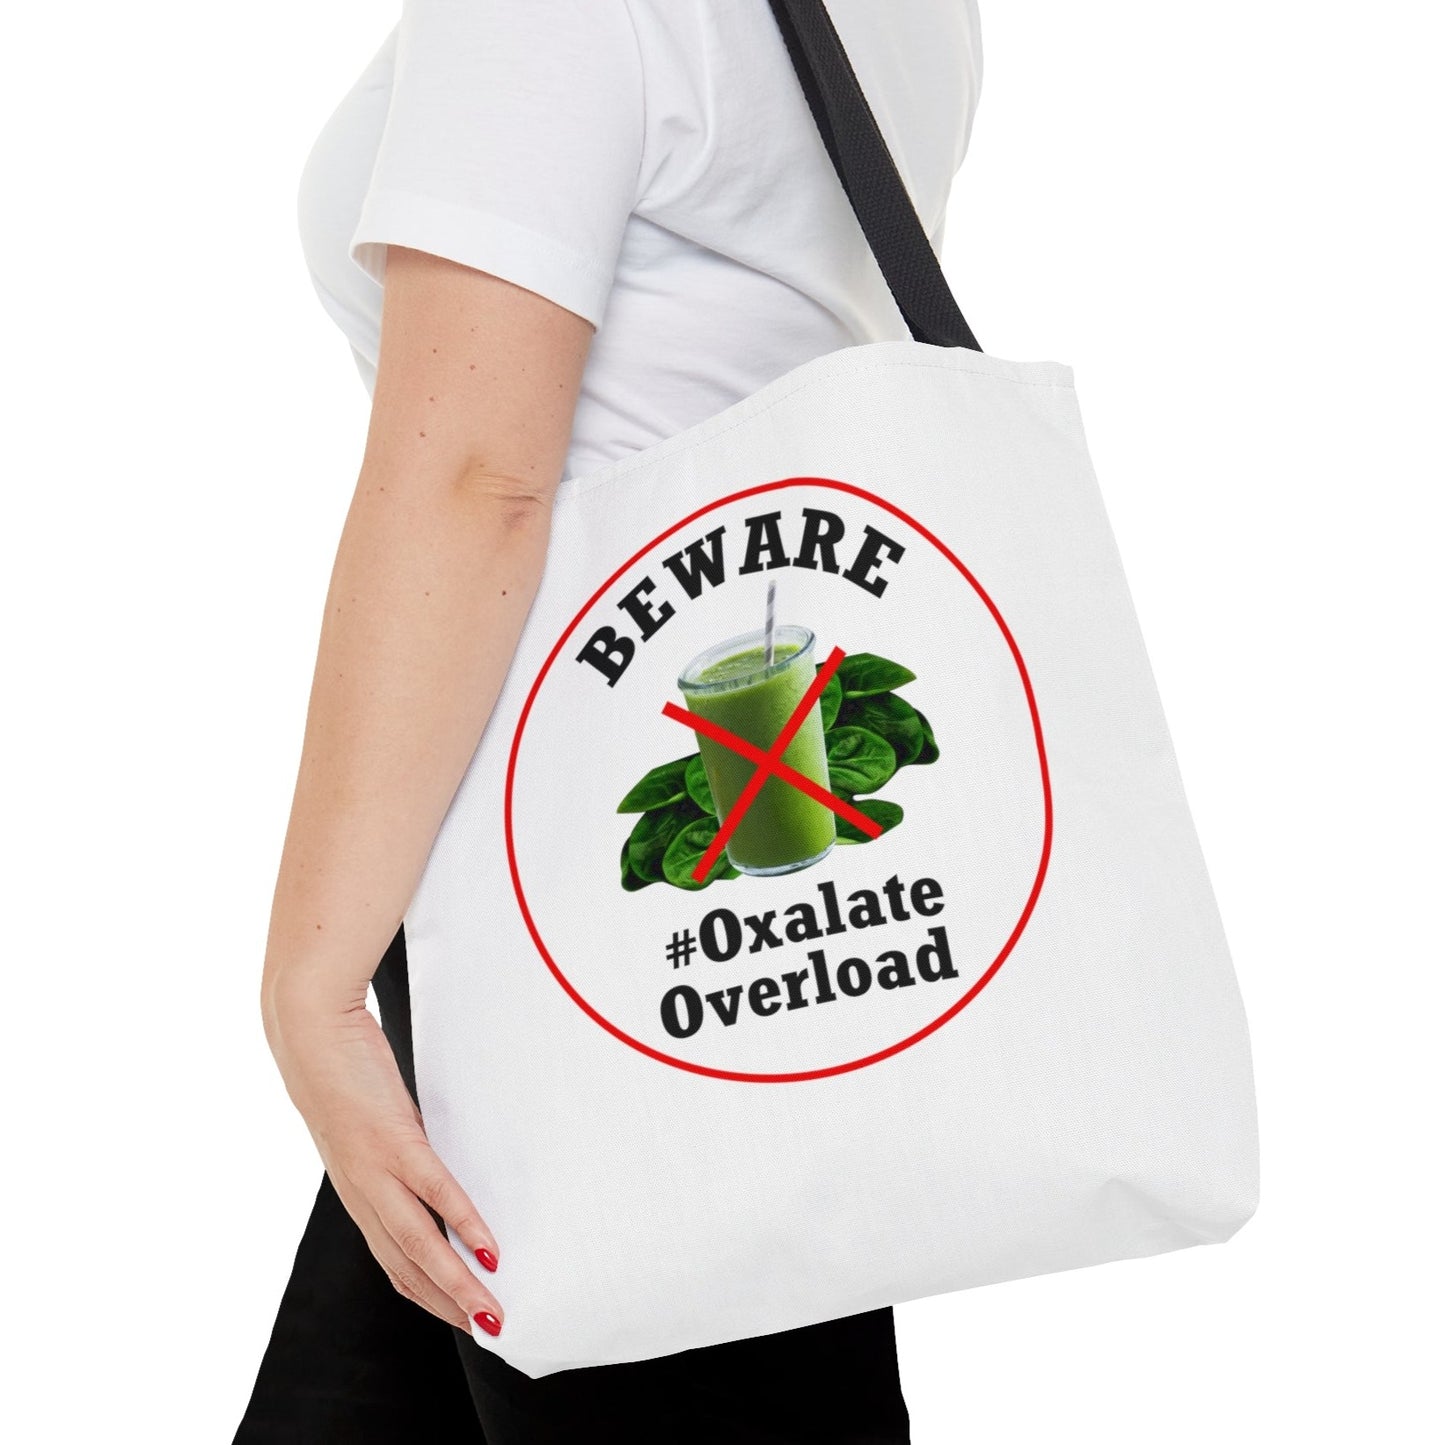 Oxalate Smoothie Overload Tote